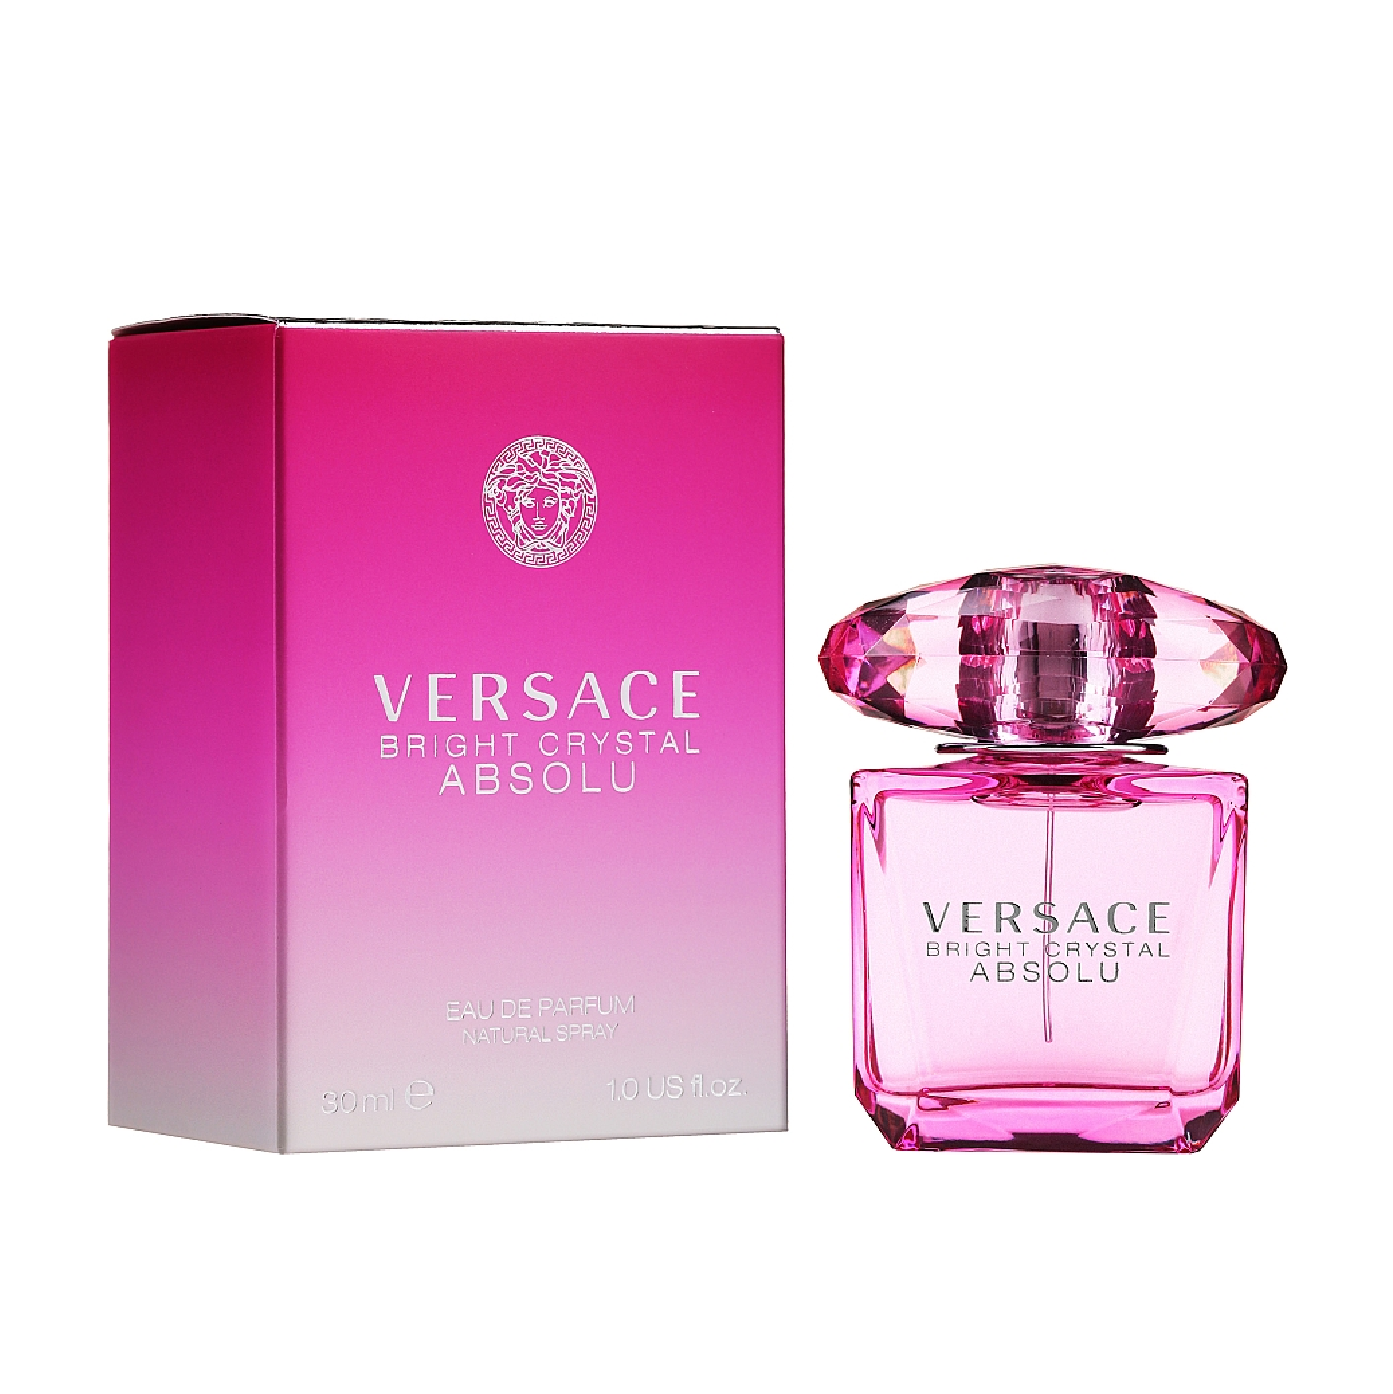 Versace Bright Crystal Absoul